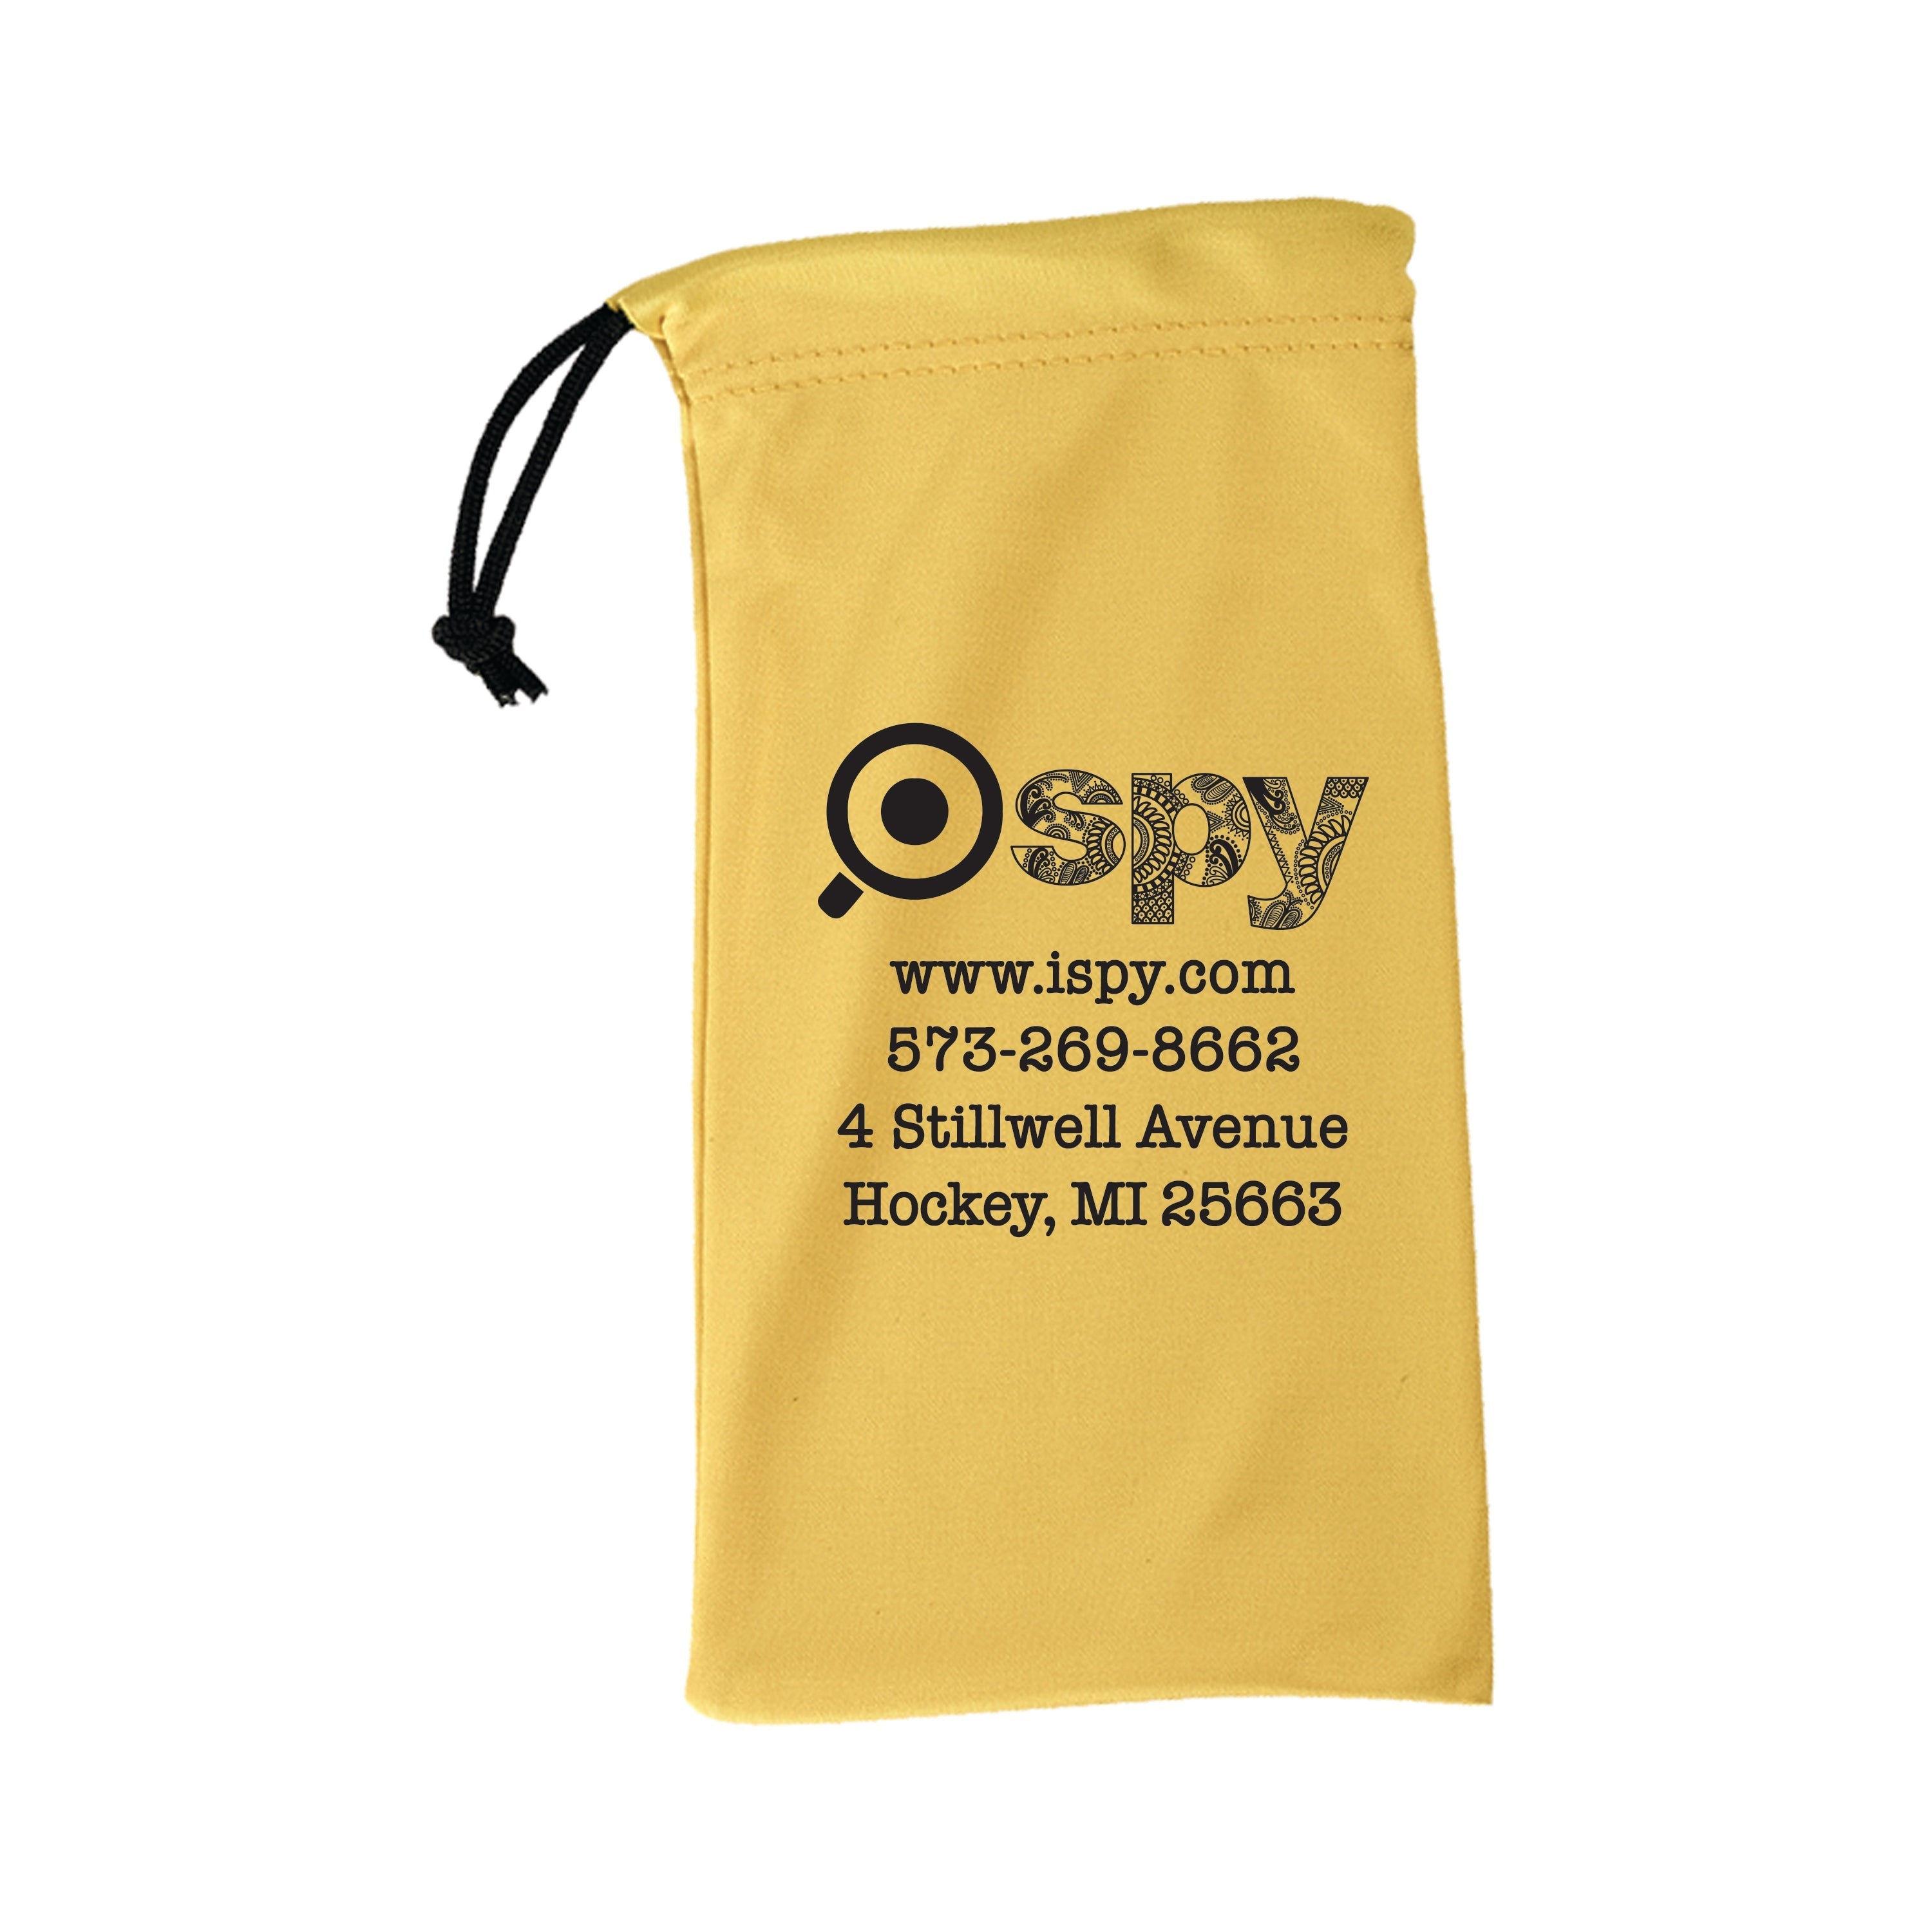 Purity™ Imprinted With Metallic Ink (Gold/Silver) Microfiber Pouches